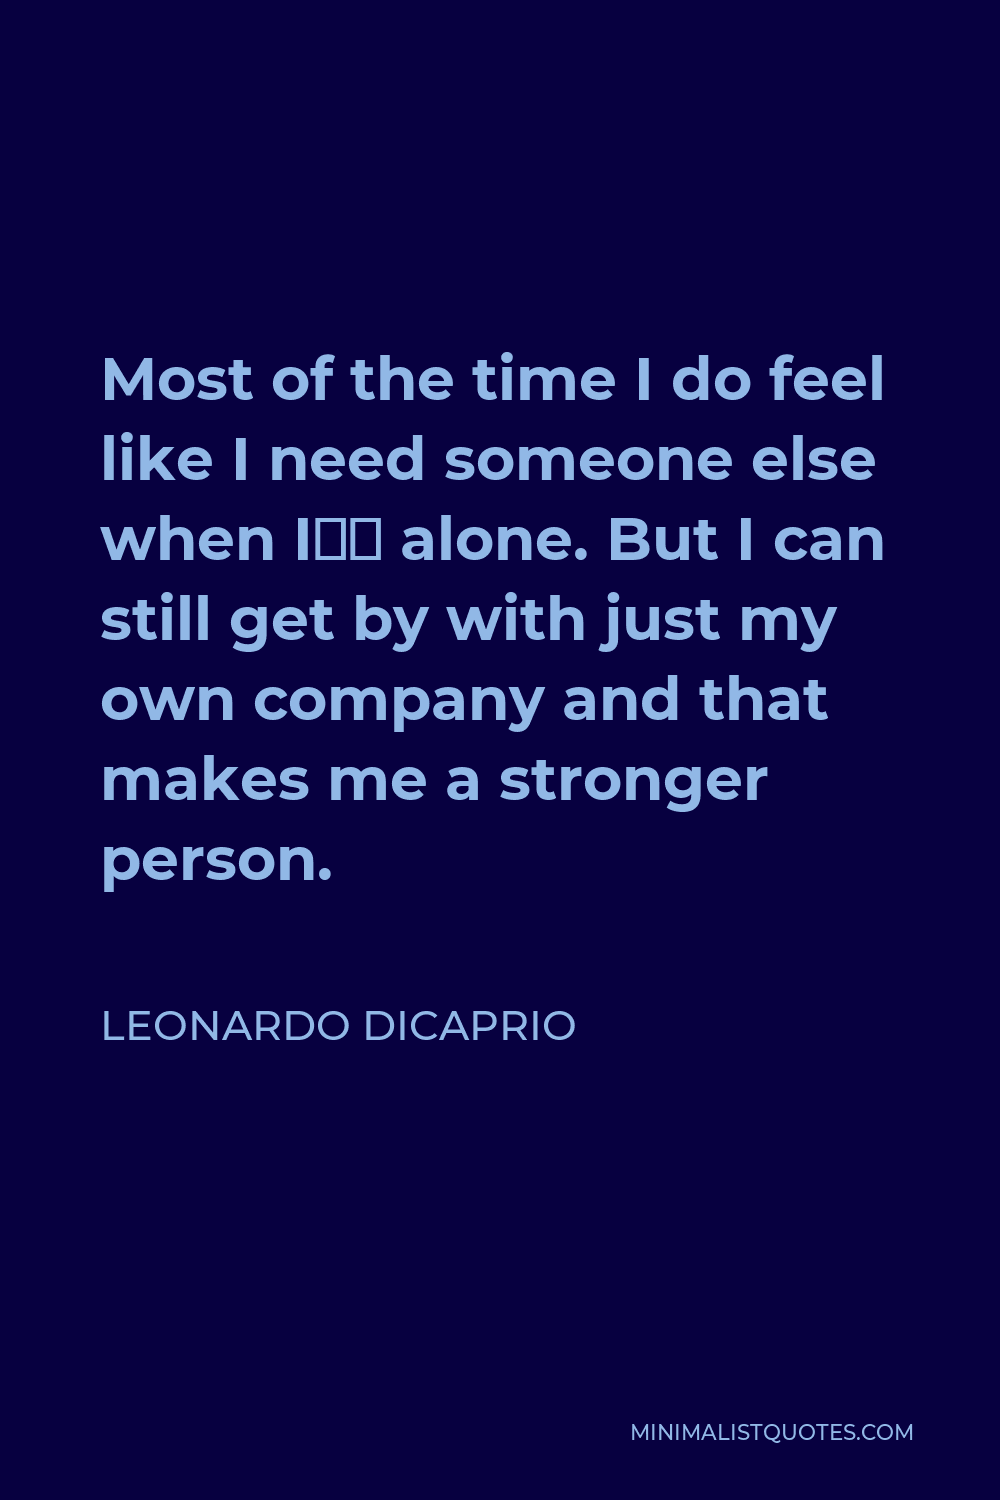 Leonardo DiCaprio Quote - Most of the time I do feel like I need someone else when I’m alone. But I can still get by with just my own company and that makes me a stronger person.